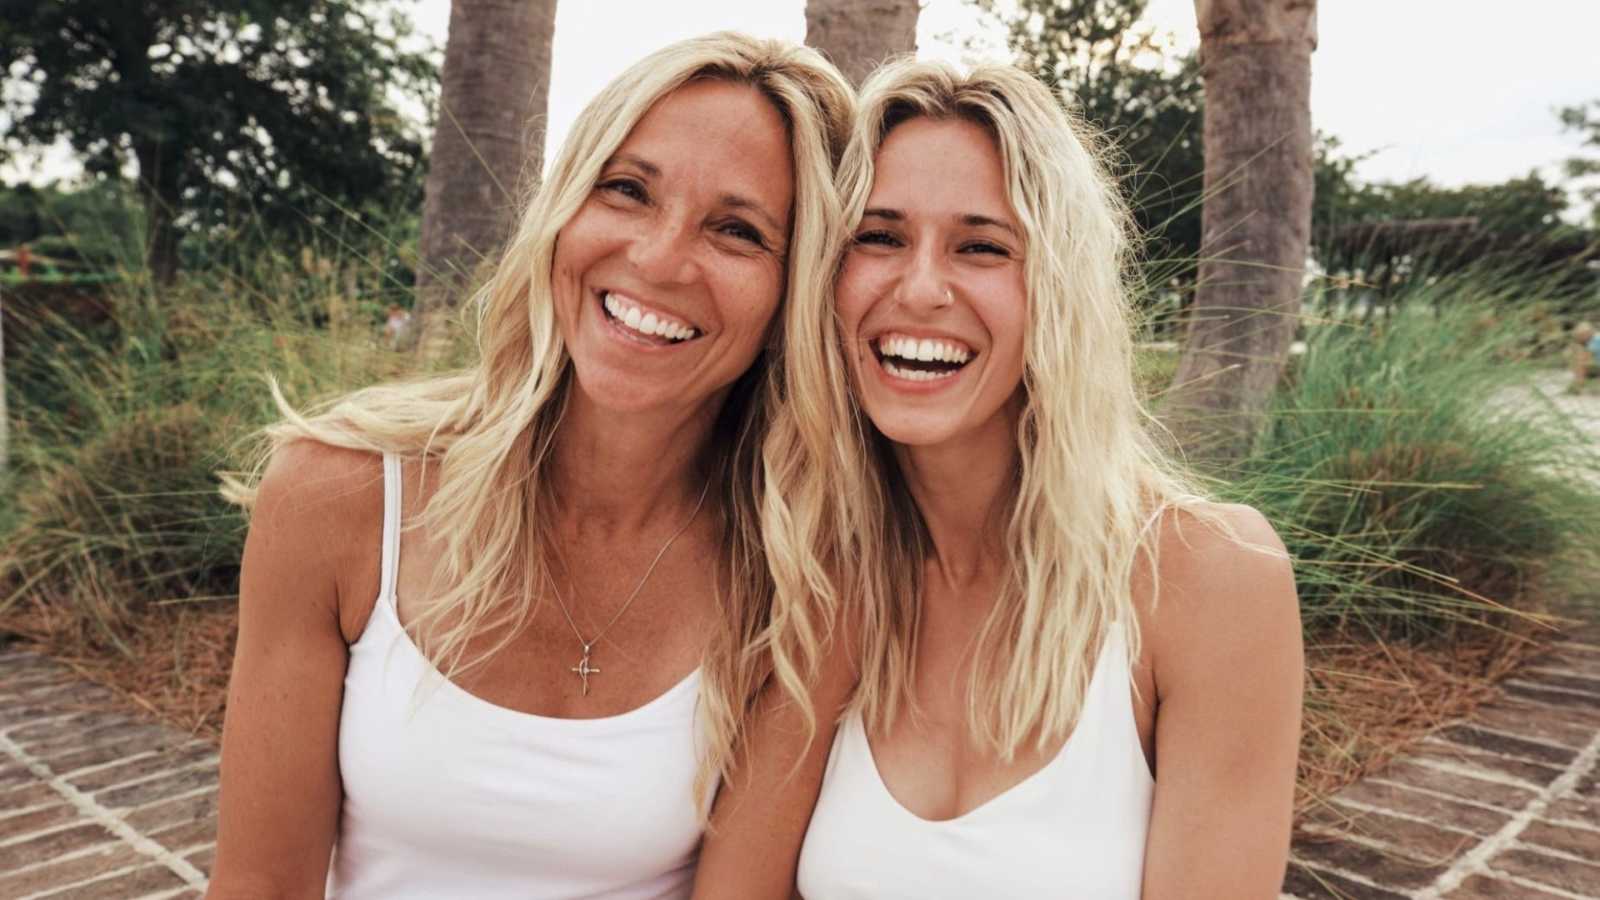 Mother and daughter take beautiful photo together, reflecting their bond and solidarity